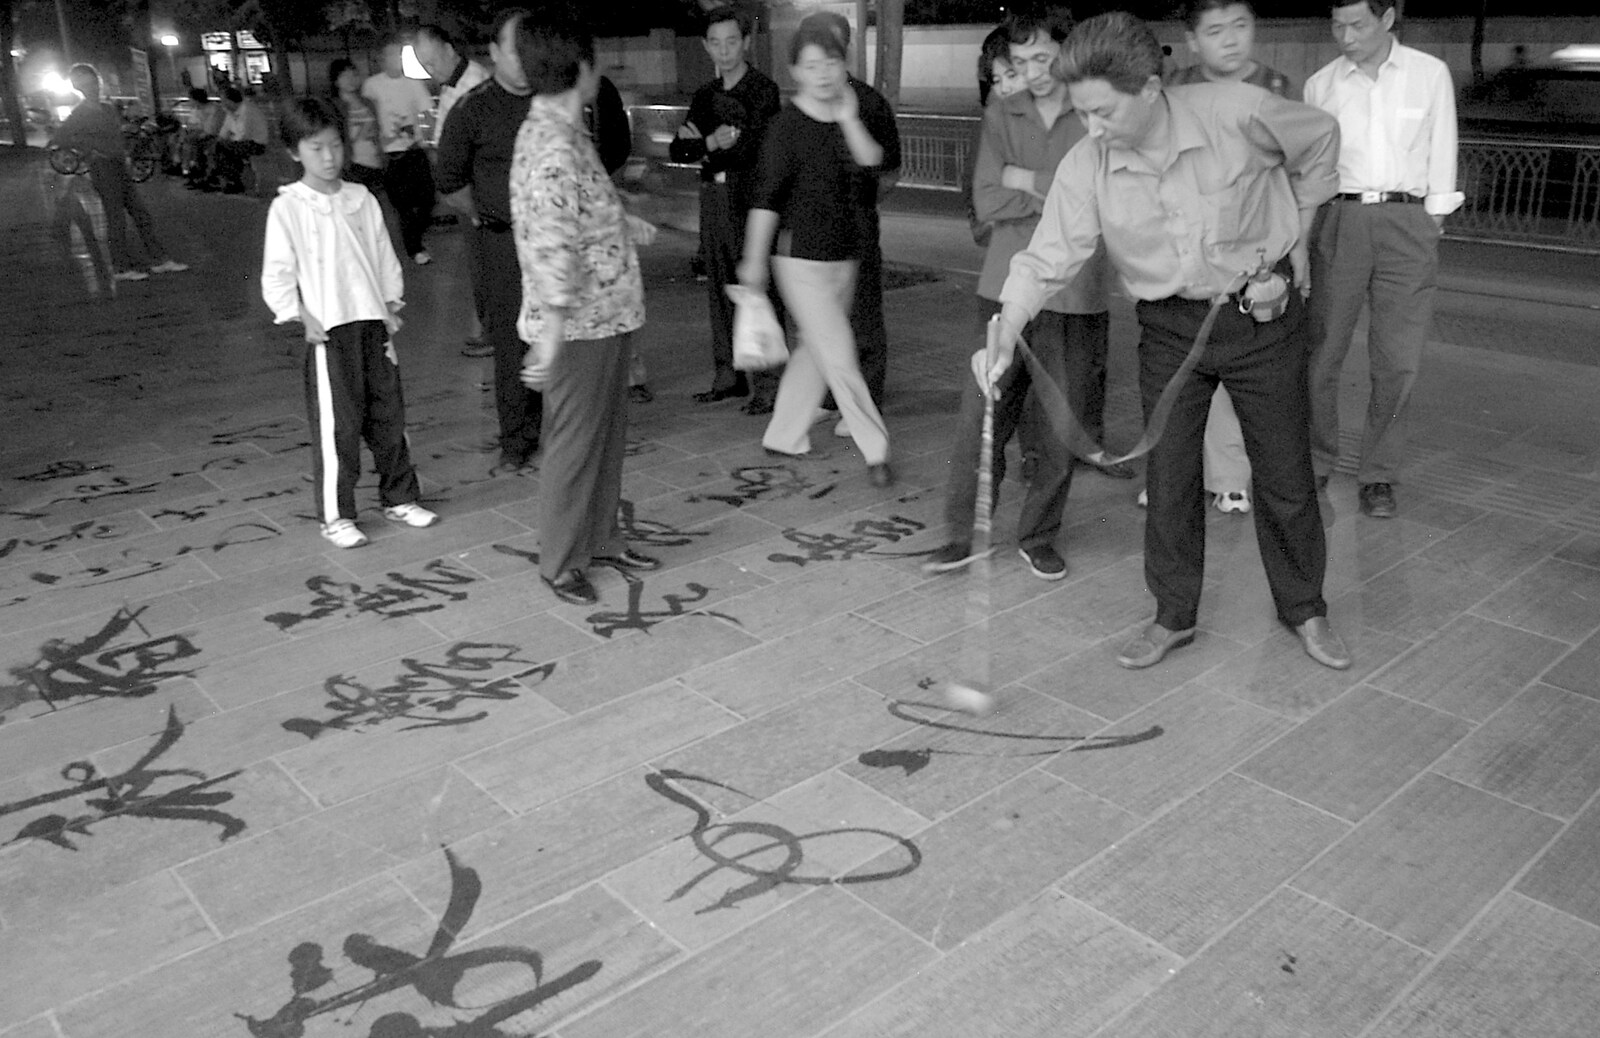 A dude writes with water on the slate pavement from Nanjing by Night, Nanjing, Jiangsu Province, China - 4th October 2006